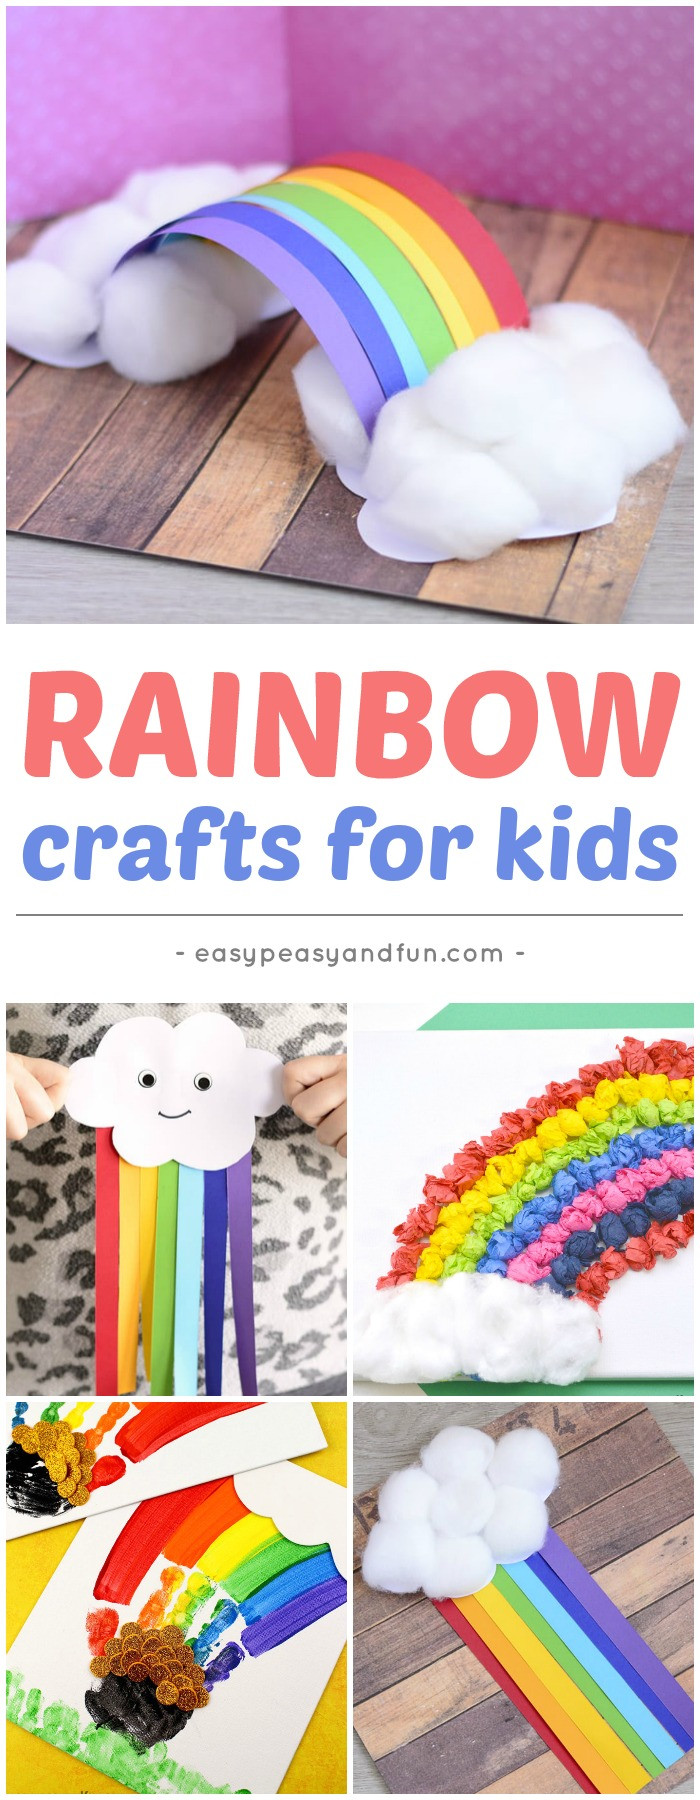 Easy Craft For Toddlers
 Rainbow Crafts for Kids Easy Peasy and Fun